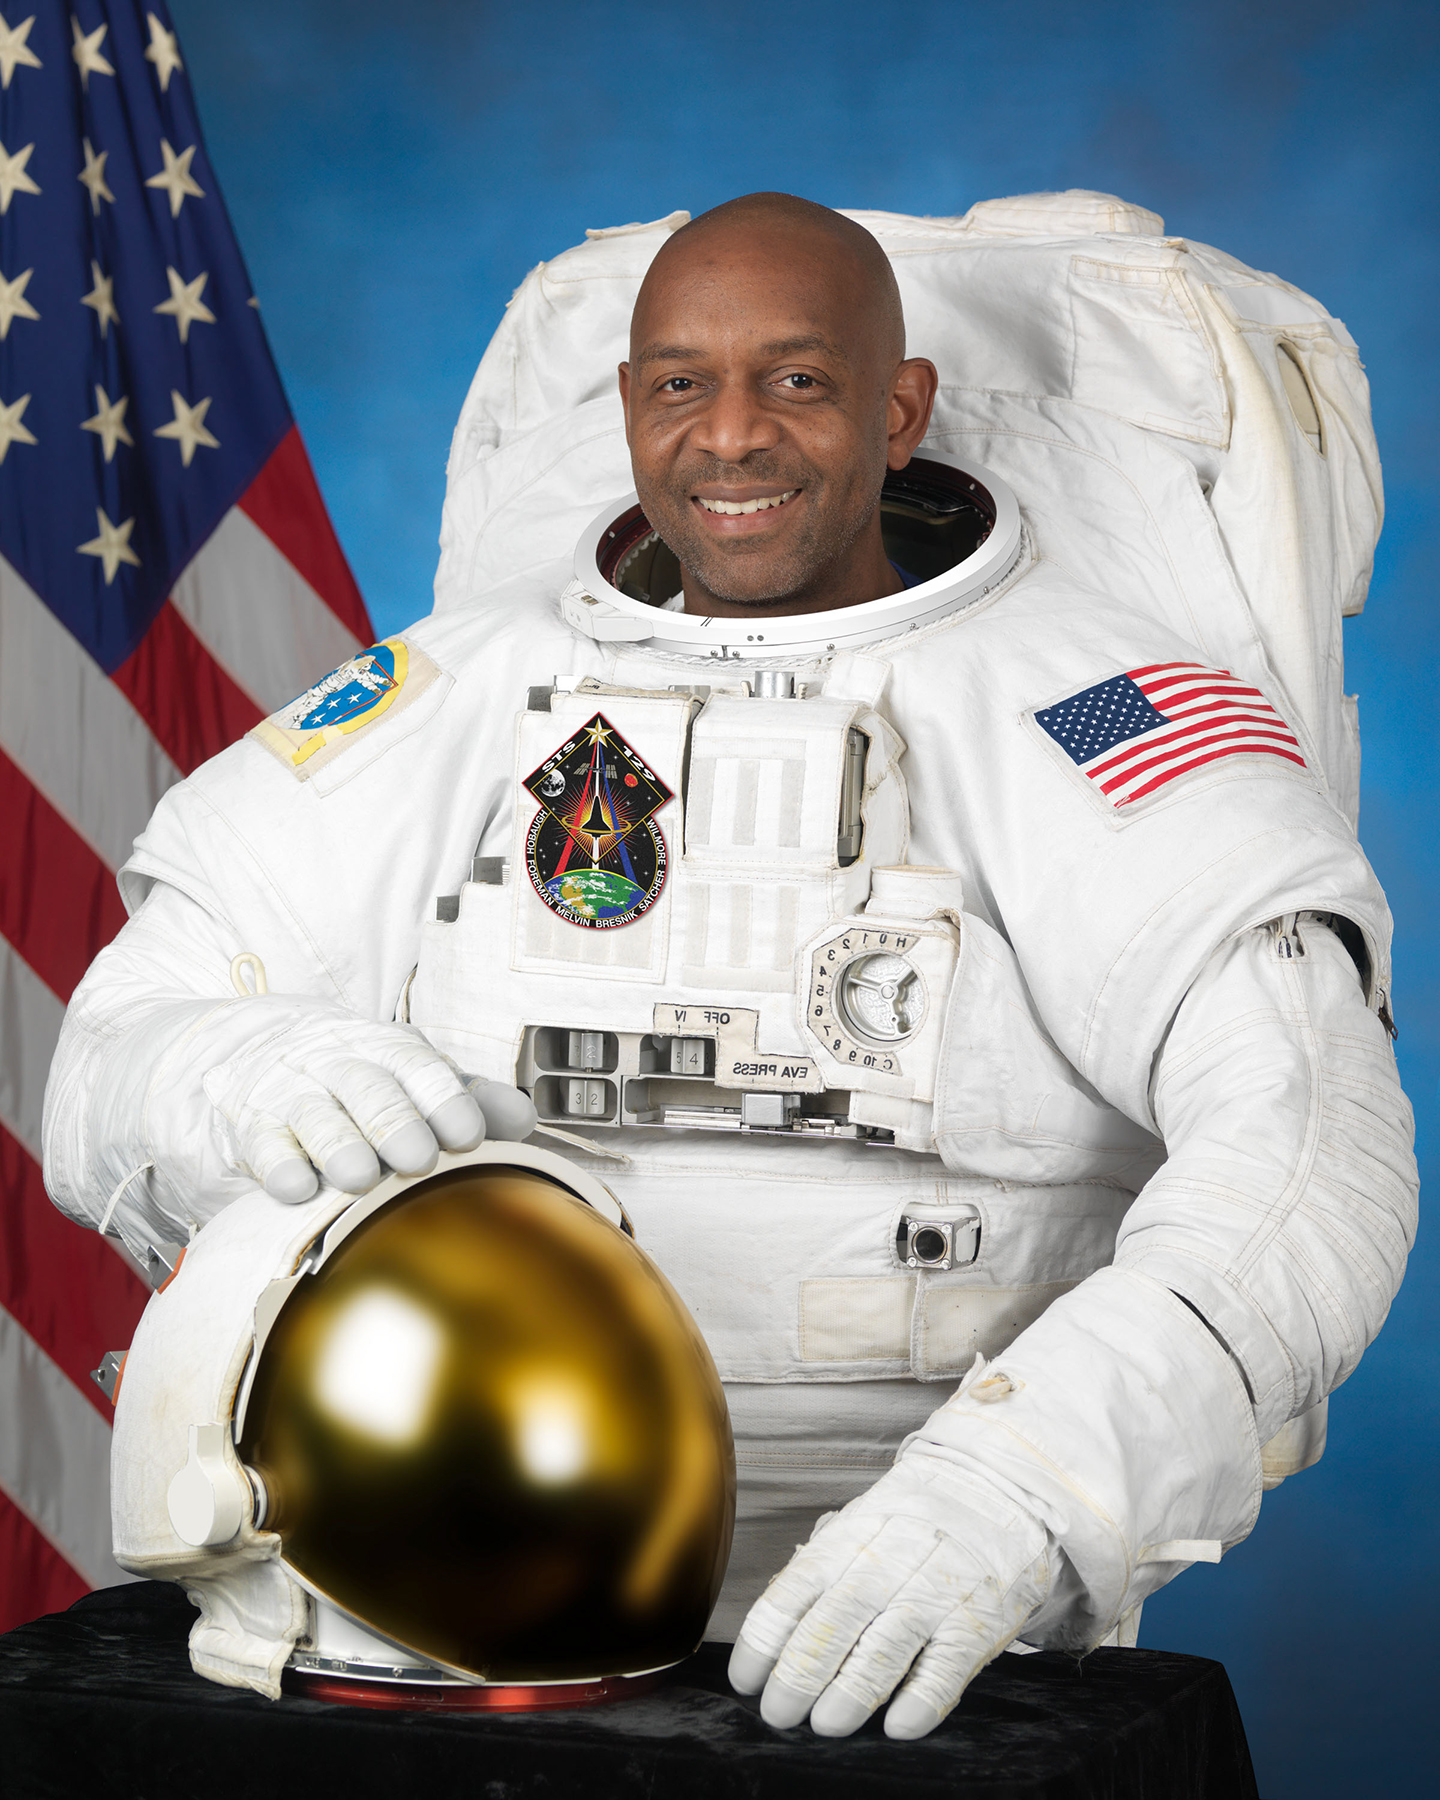 Satcher posing in space suit in front of American flag